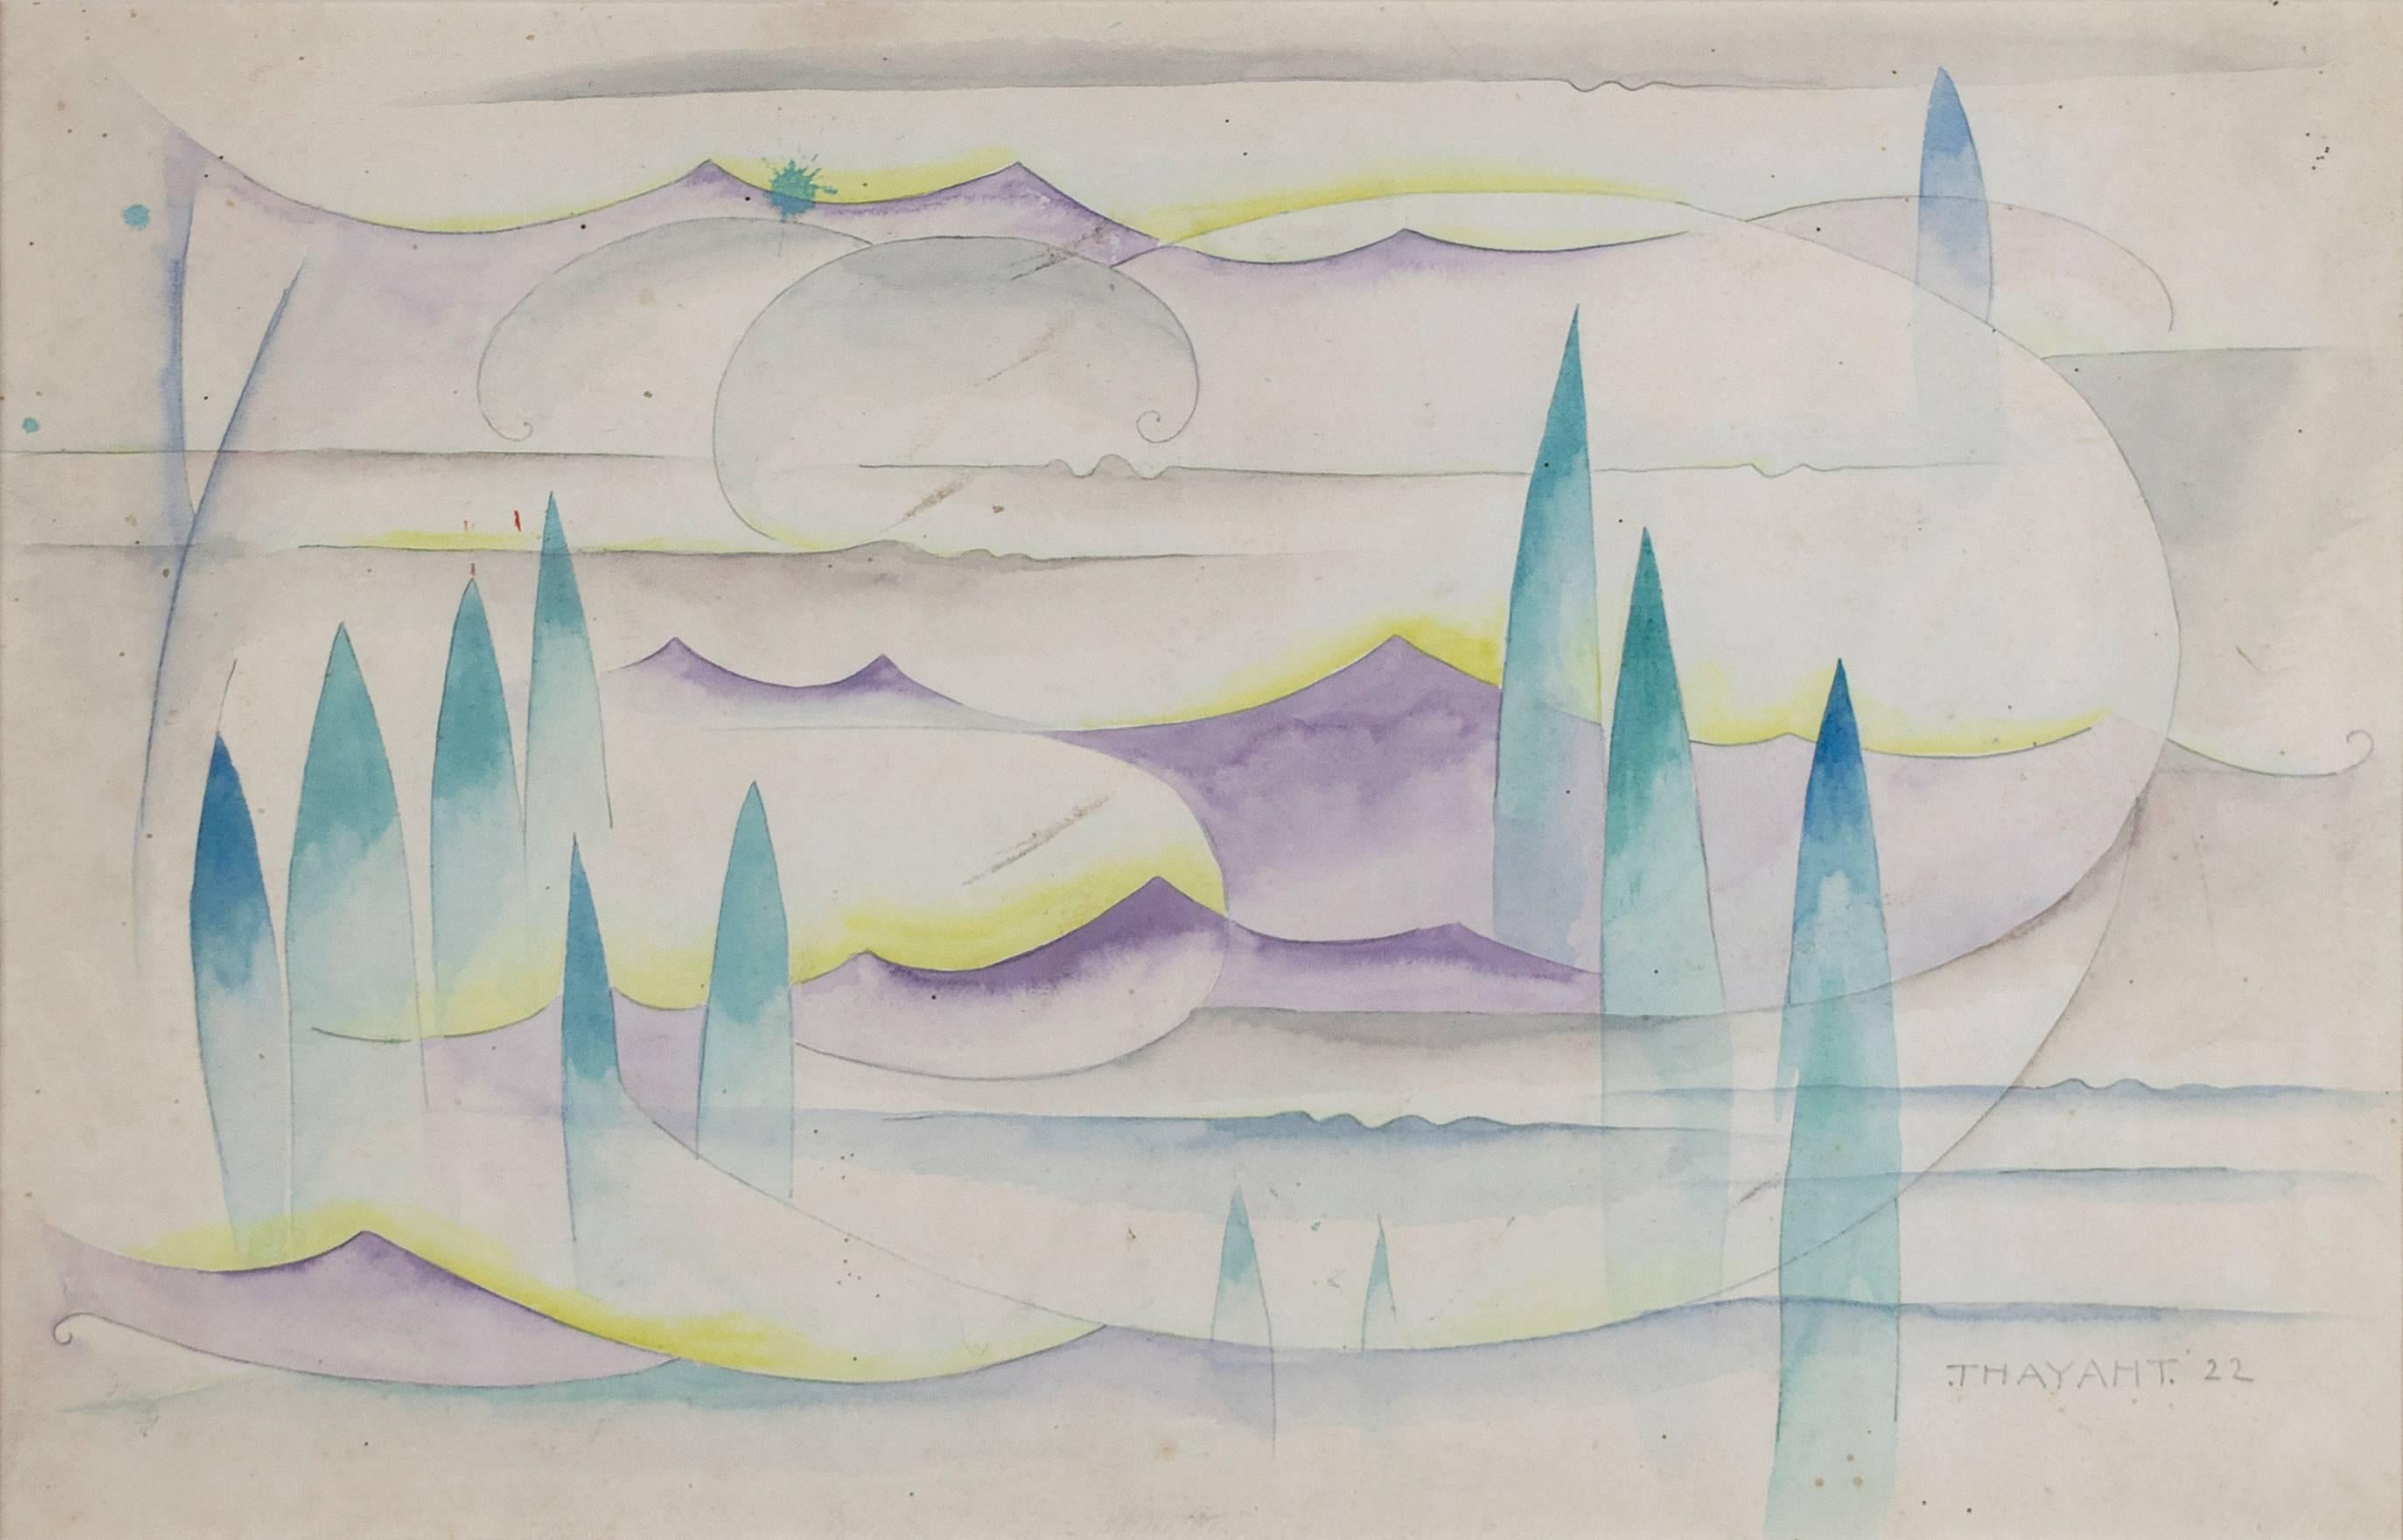 An Italian Futurist period watercolor landscape by Ernesto Micaelles (Thayaht), 1922. Signed and dated lower right.

Futurism was an artistic and social movement that originated in Italy in the early 20th Century. It glorified modernity and aimed to